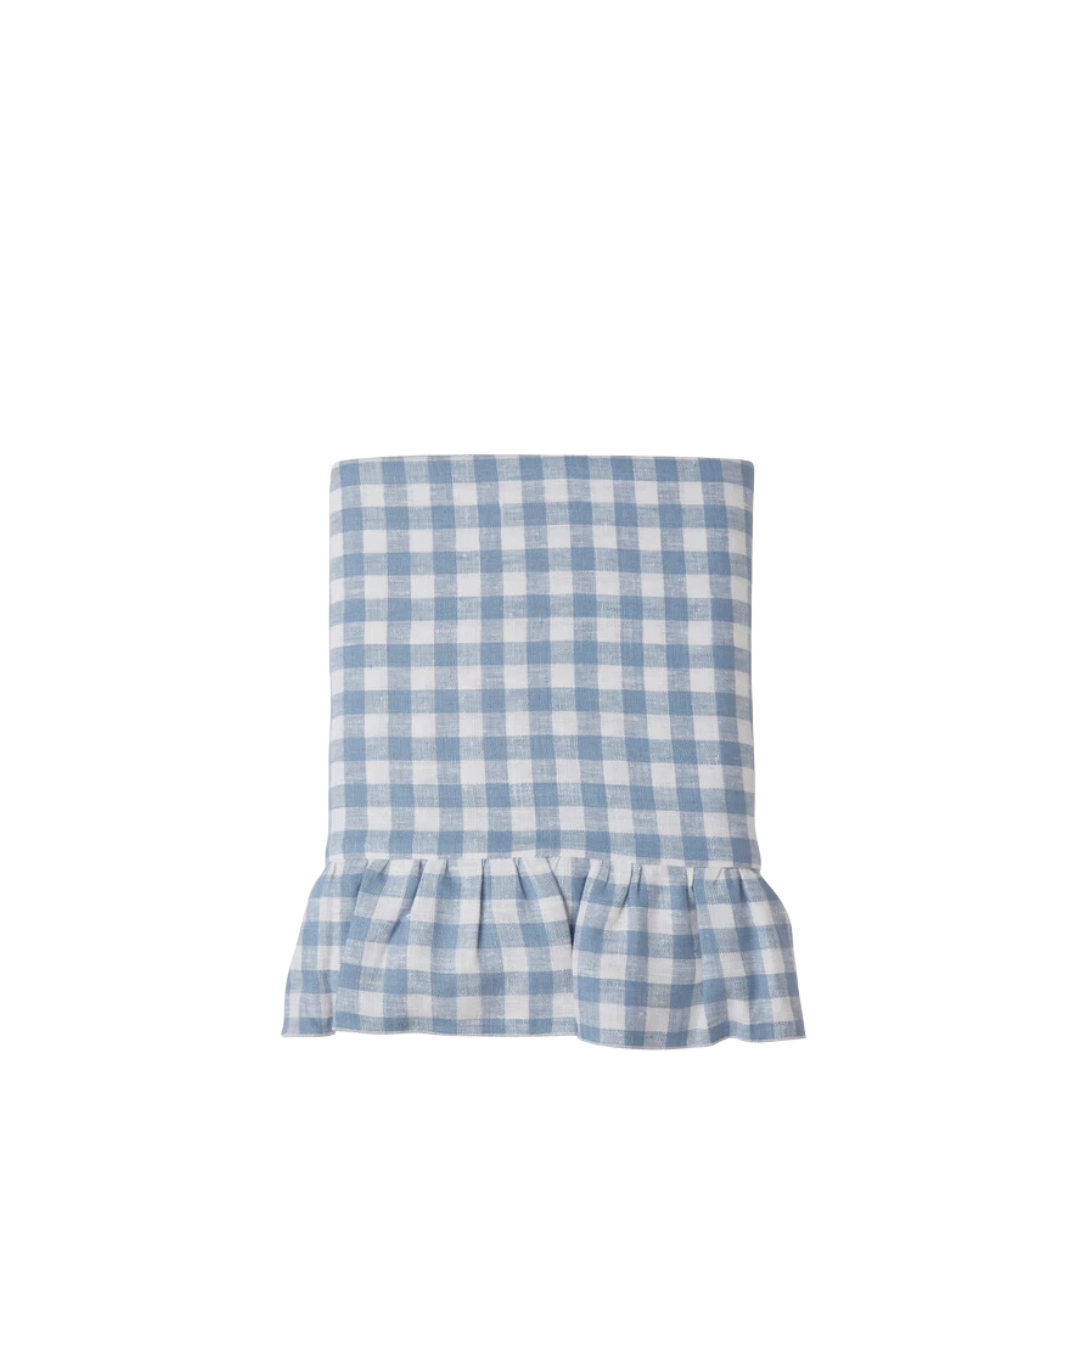 Placemat Gingham with Frill - Blue (Set of 4)